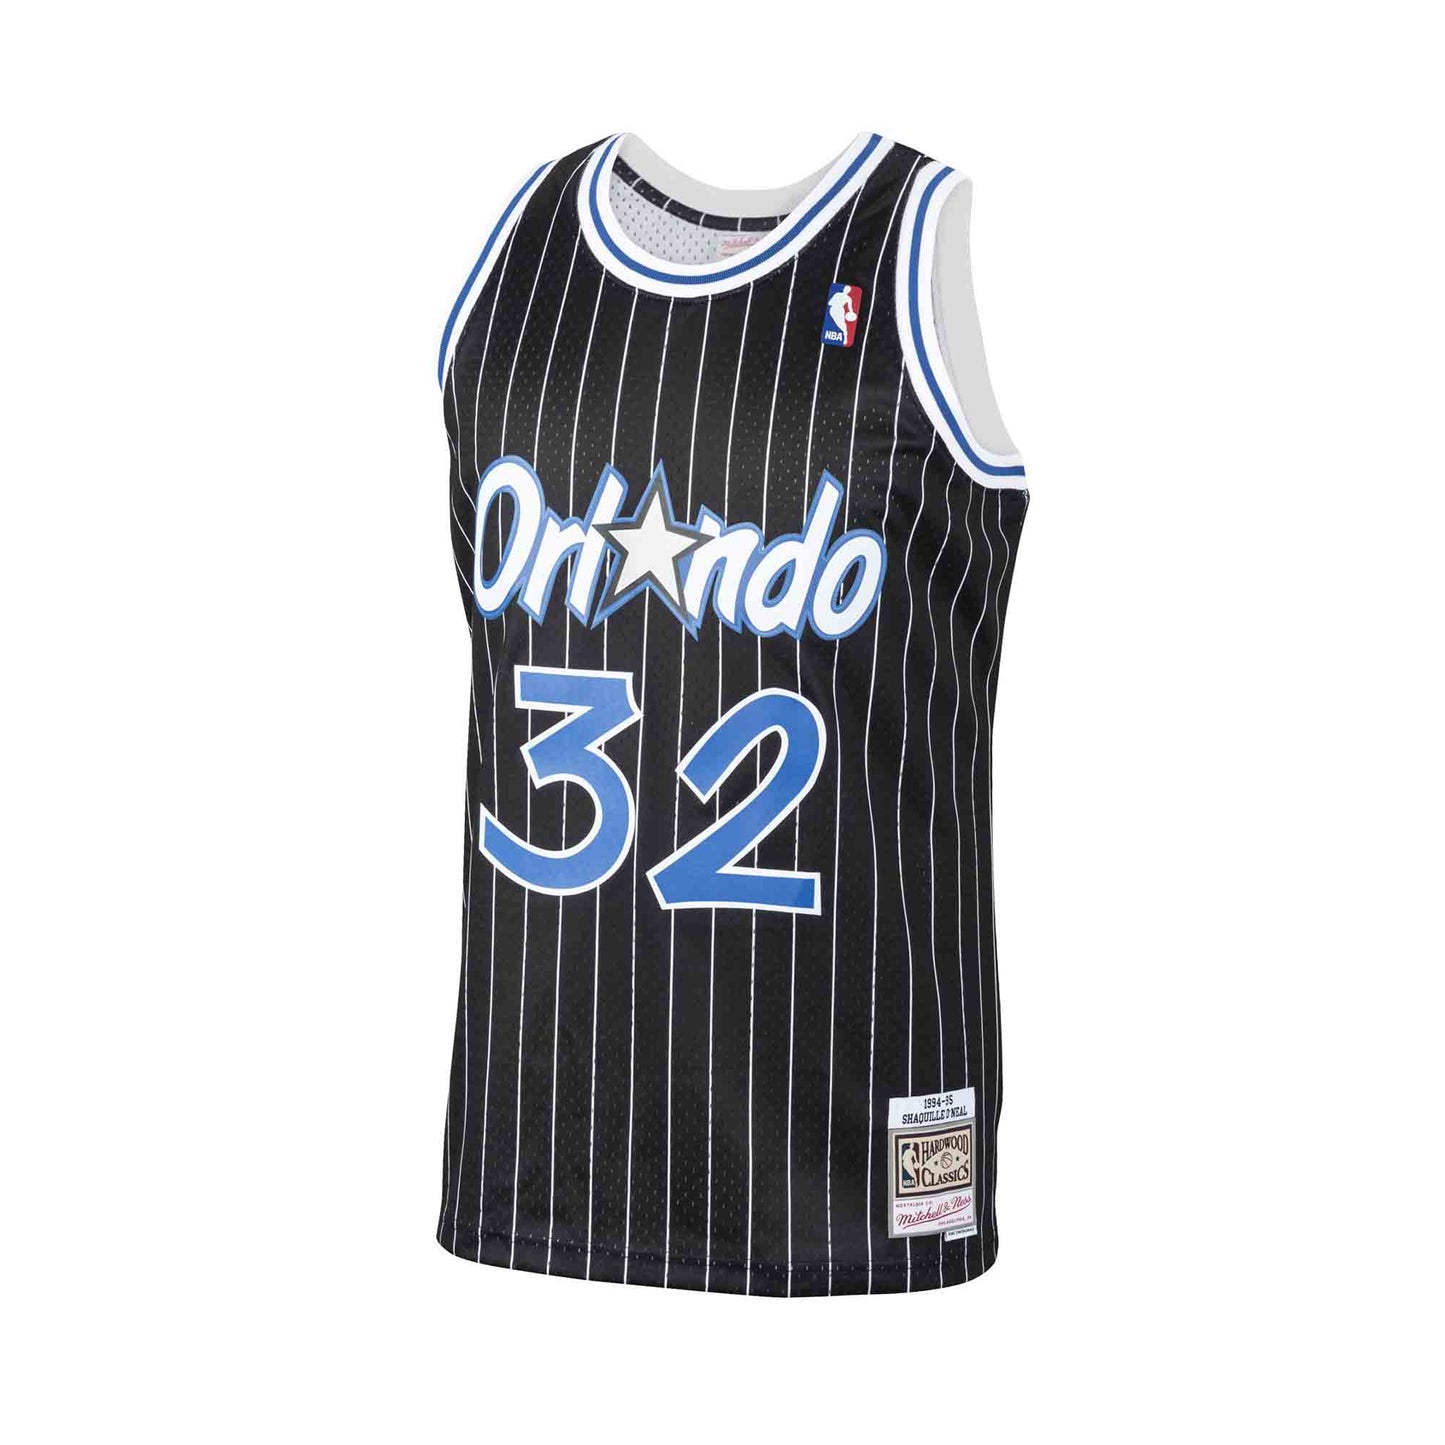 Mitchell & Ness Shaquille O'Neal 1994-95 Authentic Jersey Orlando Magic